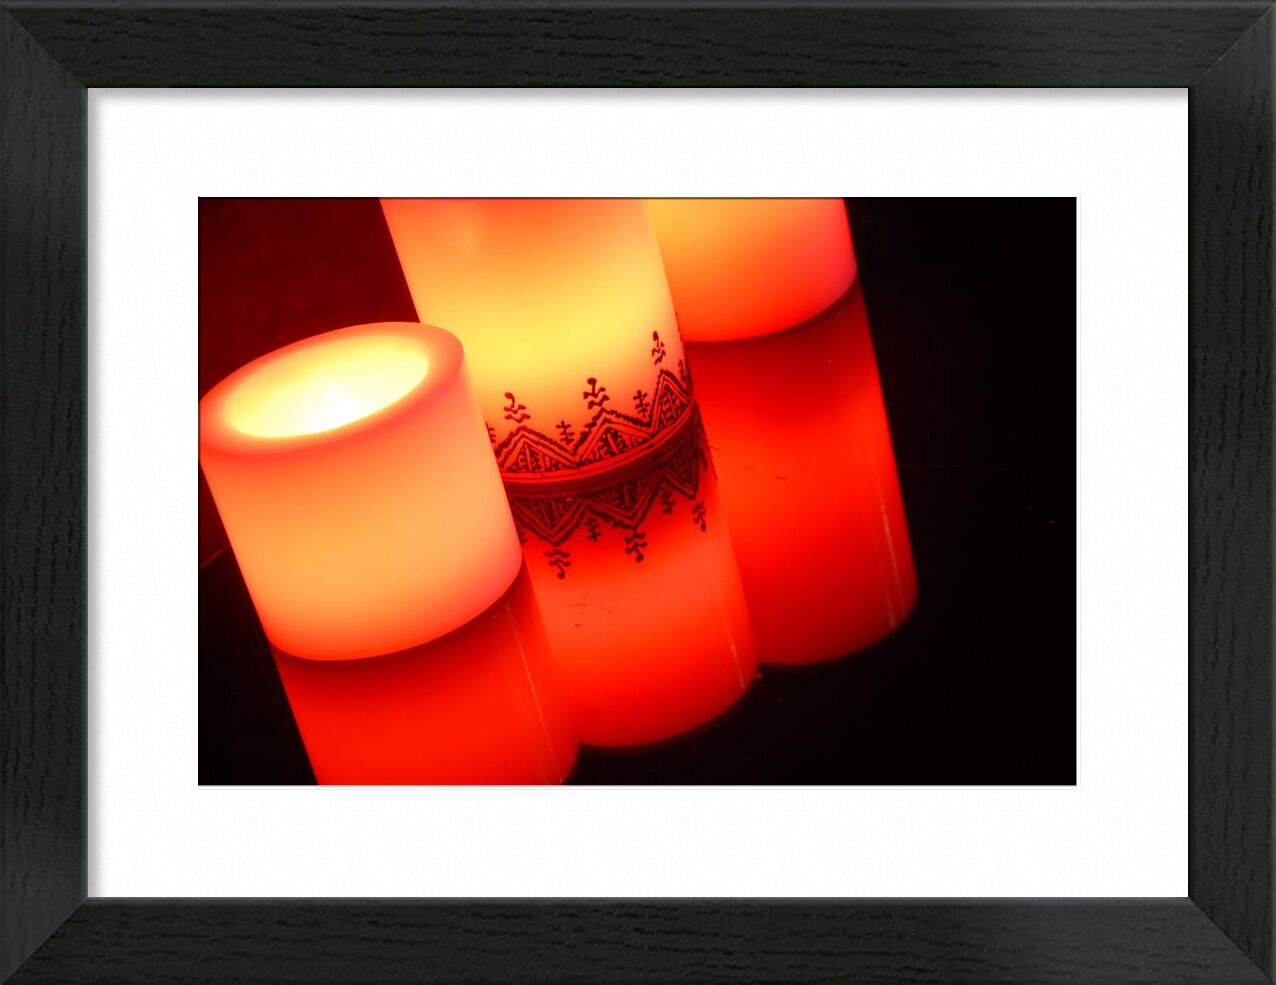 Natural lights from Pierre Gaultier, Prodi Art, art, bright, burn, burning, candle, candlelight, close-up, color, dark, design, flame, heat, hot, illuminated, light, lighted, shining, still life, warmly, wax